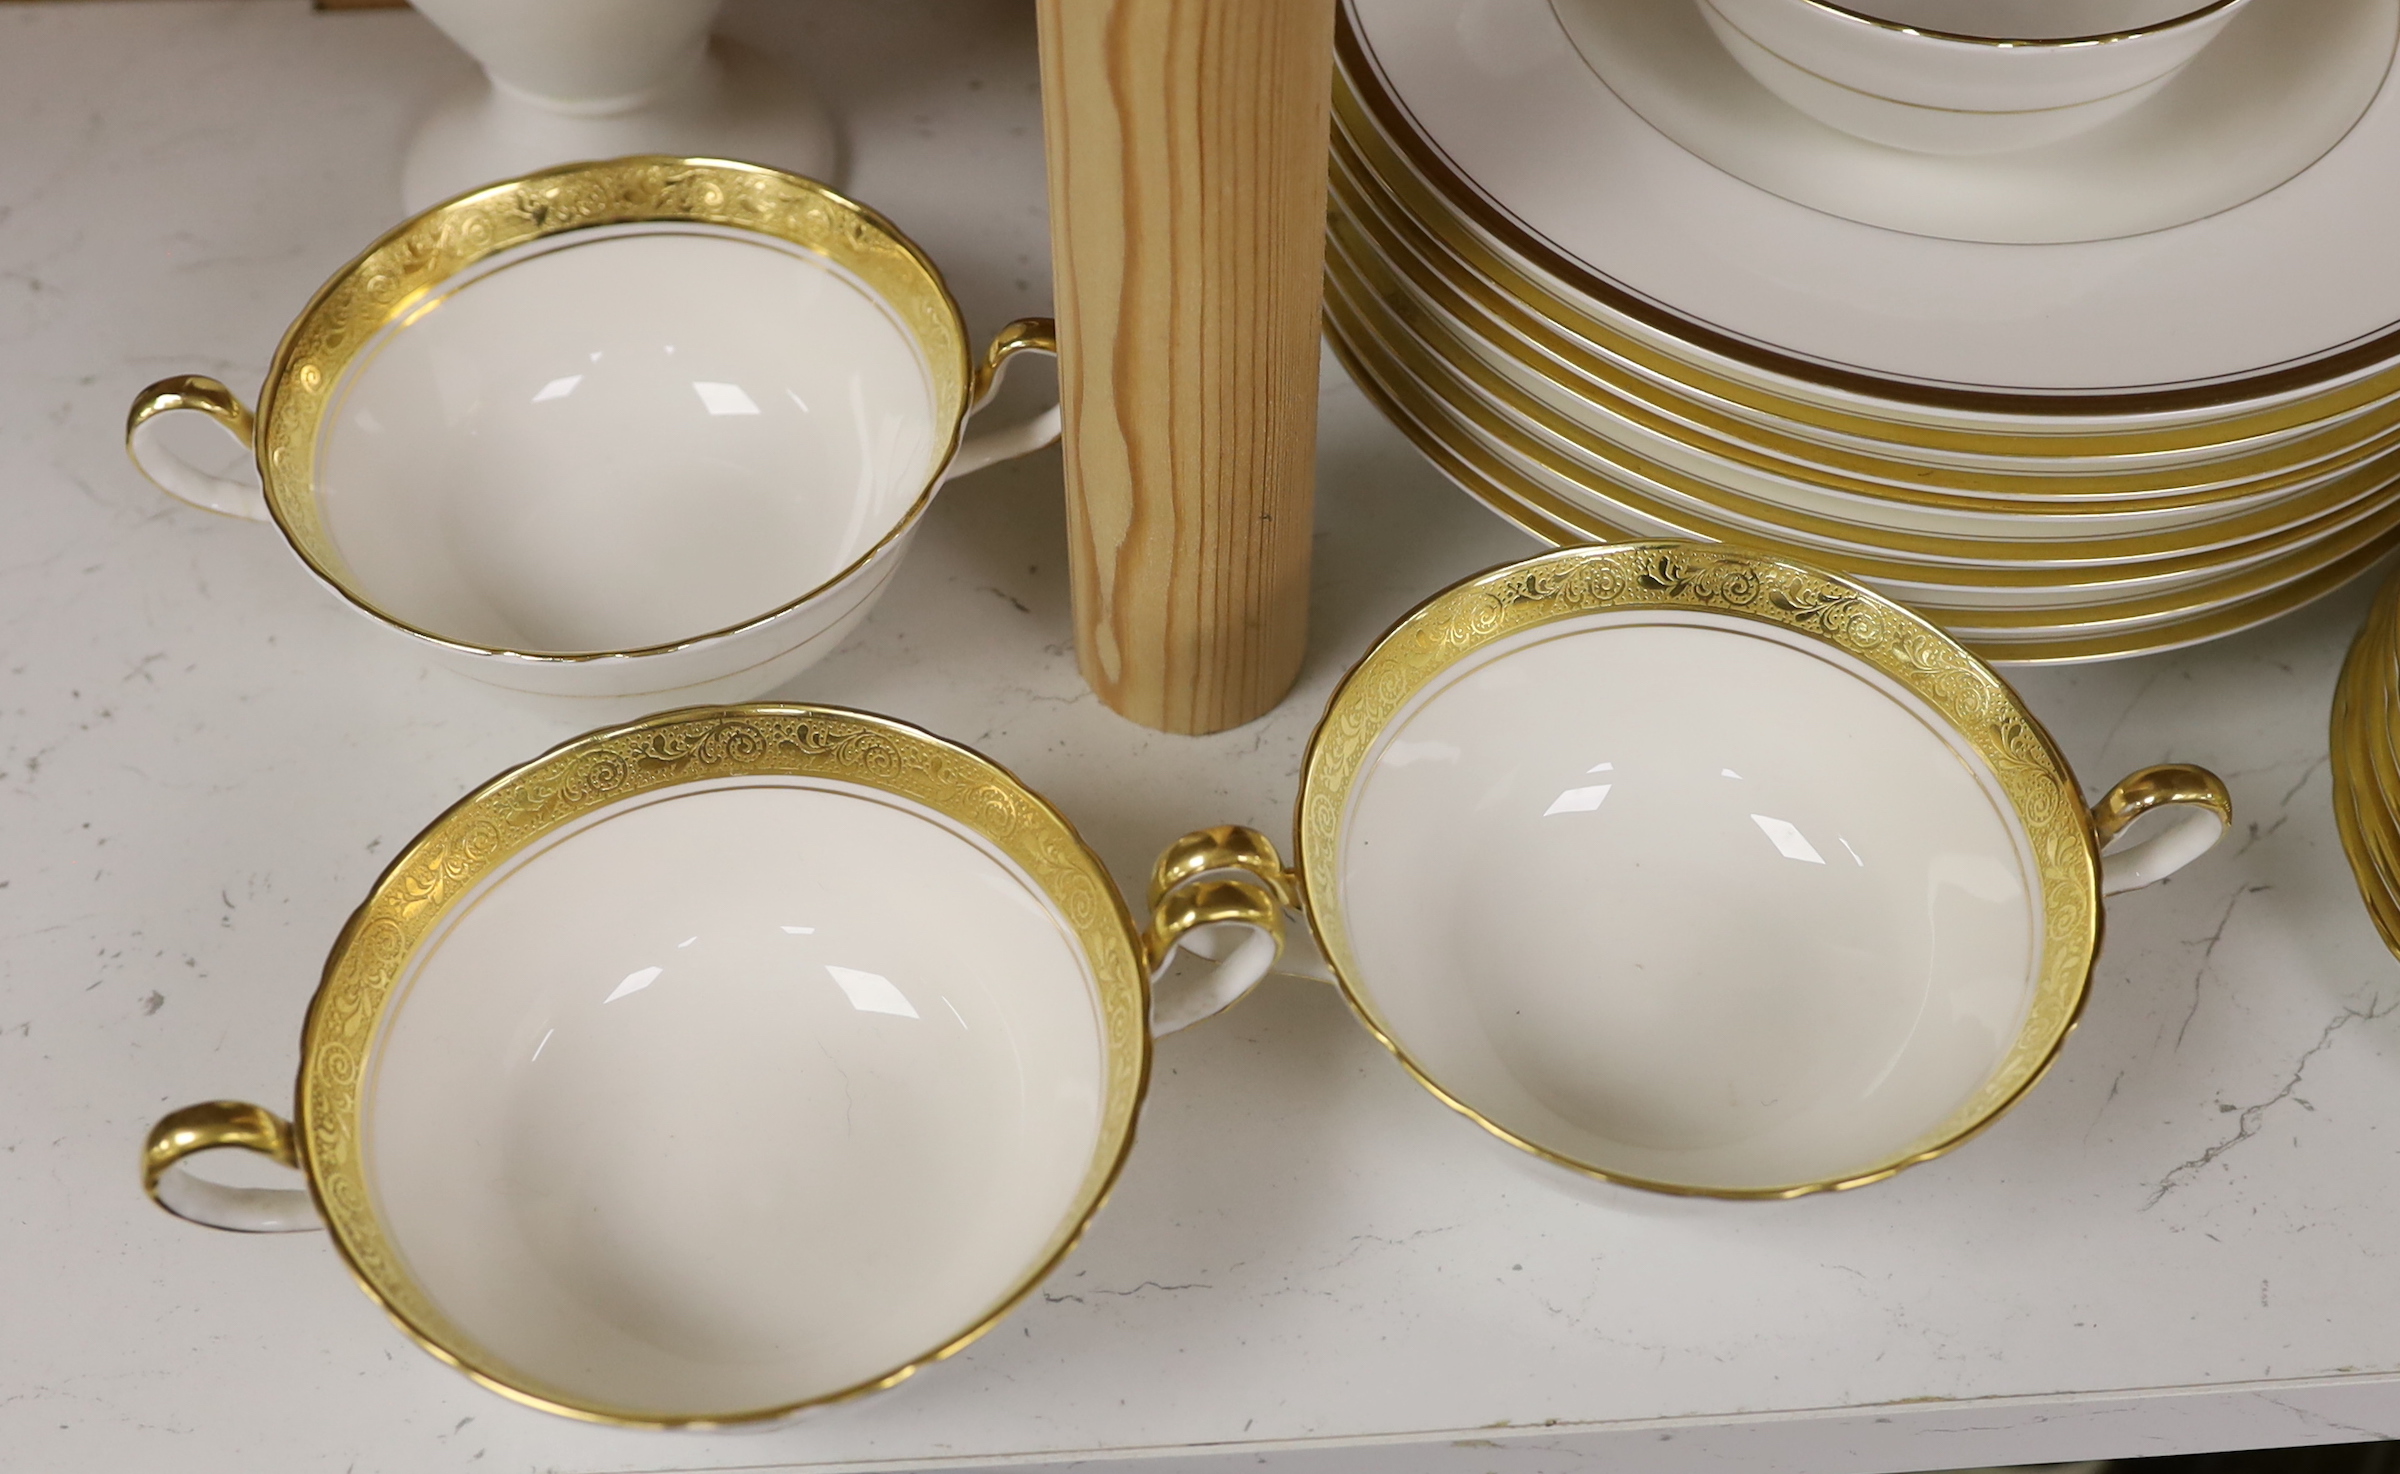 Anysley Argosy, Wedgwood Gold Florentine, Worcester gold decorated dinner wares including coffee pot, soup bowls, twin handled bowls and plates